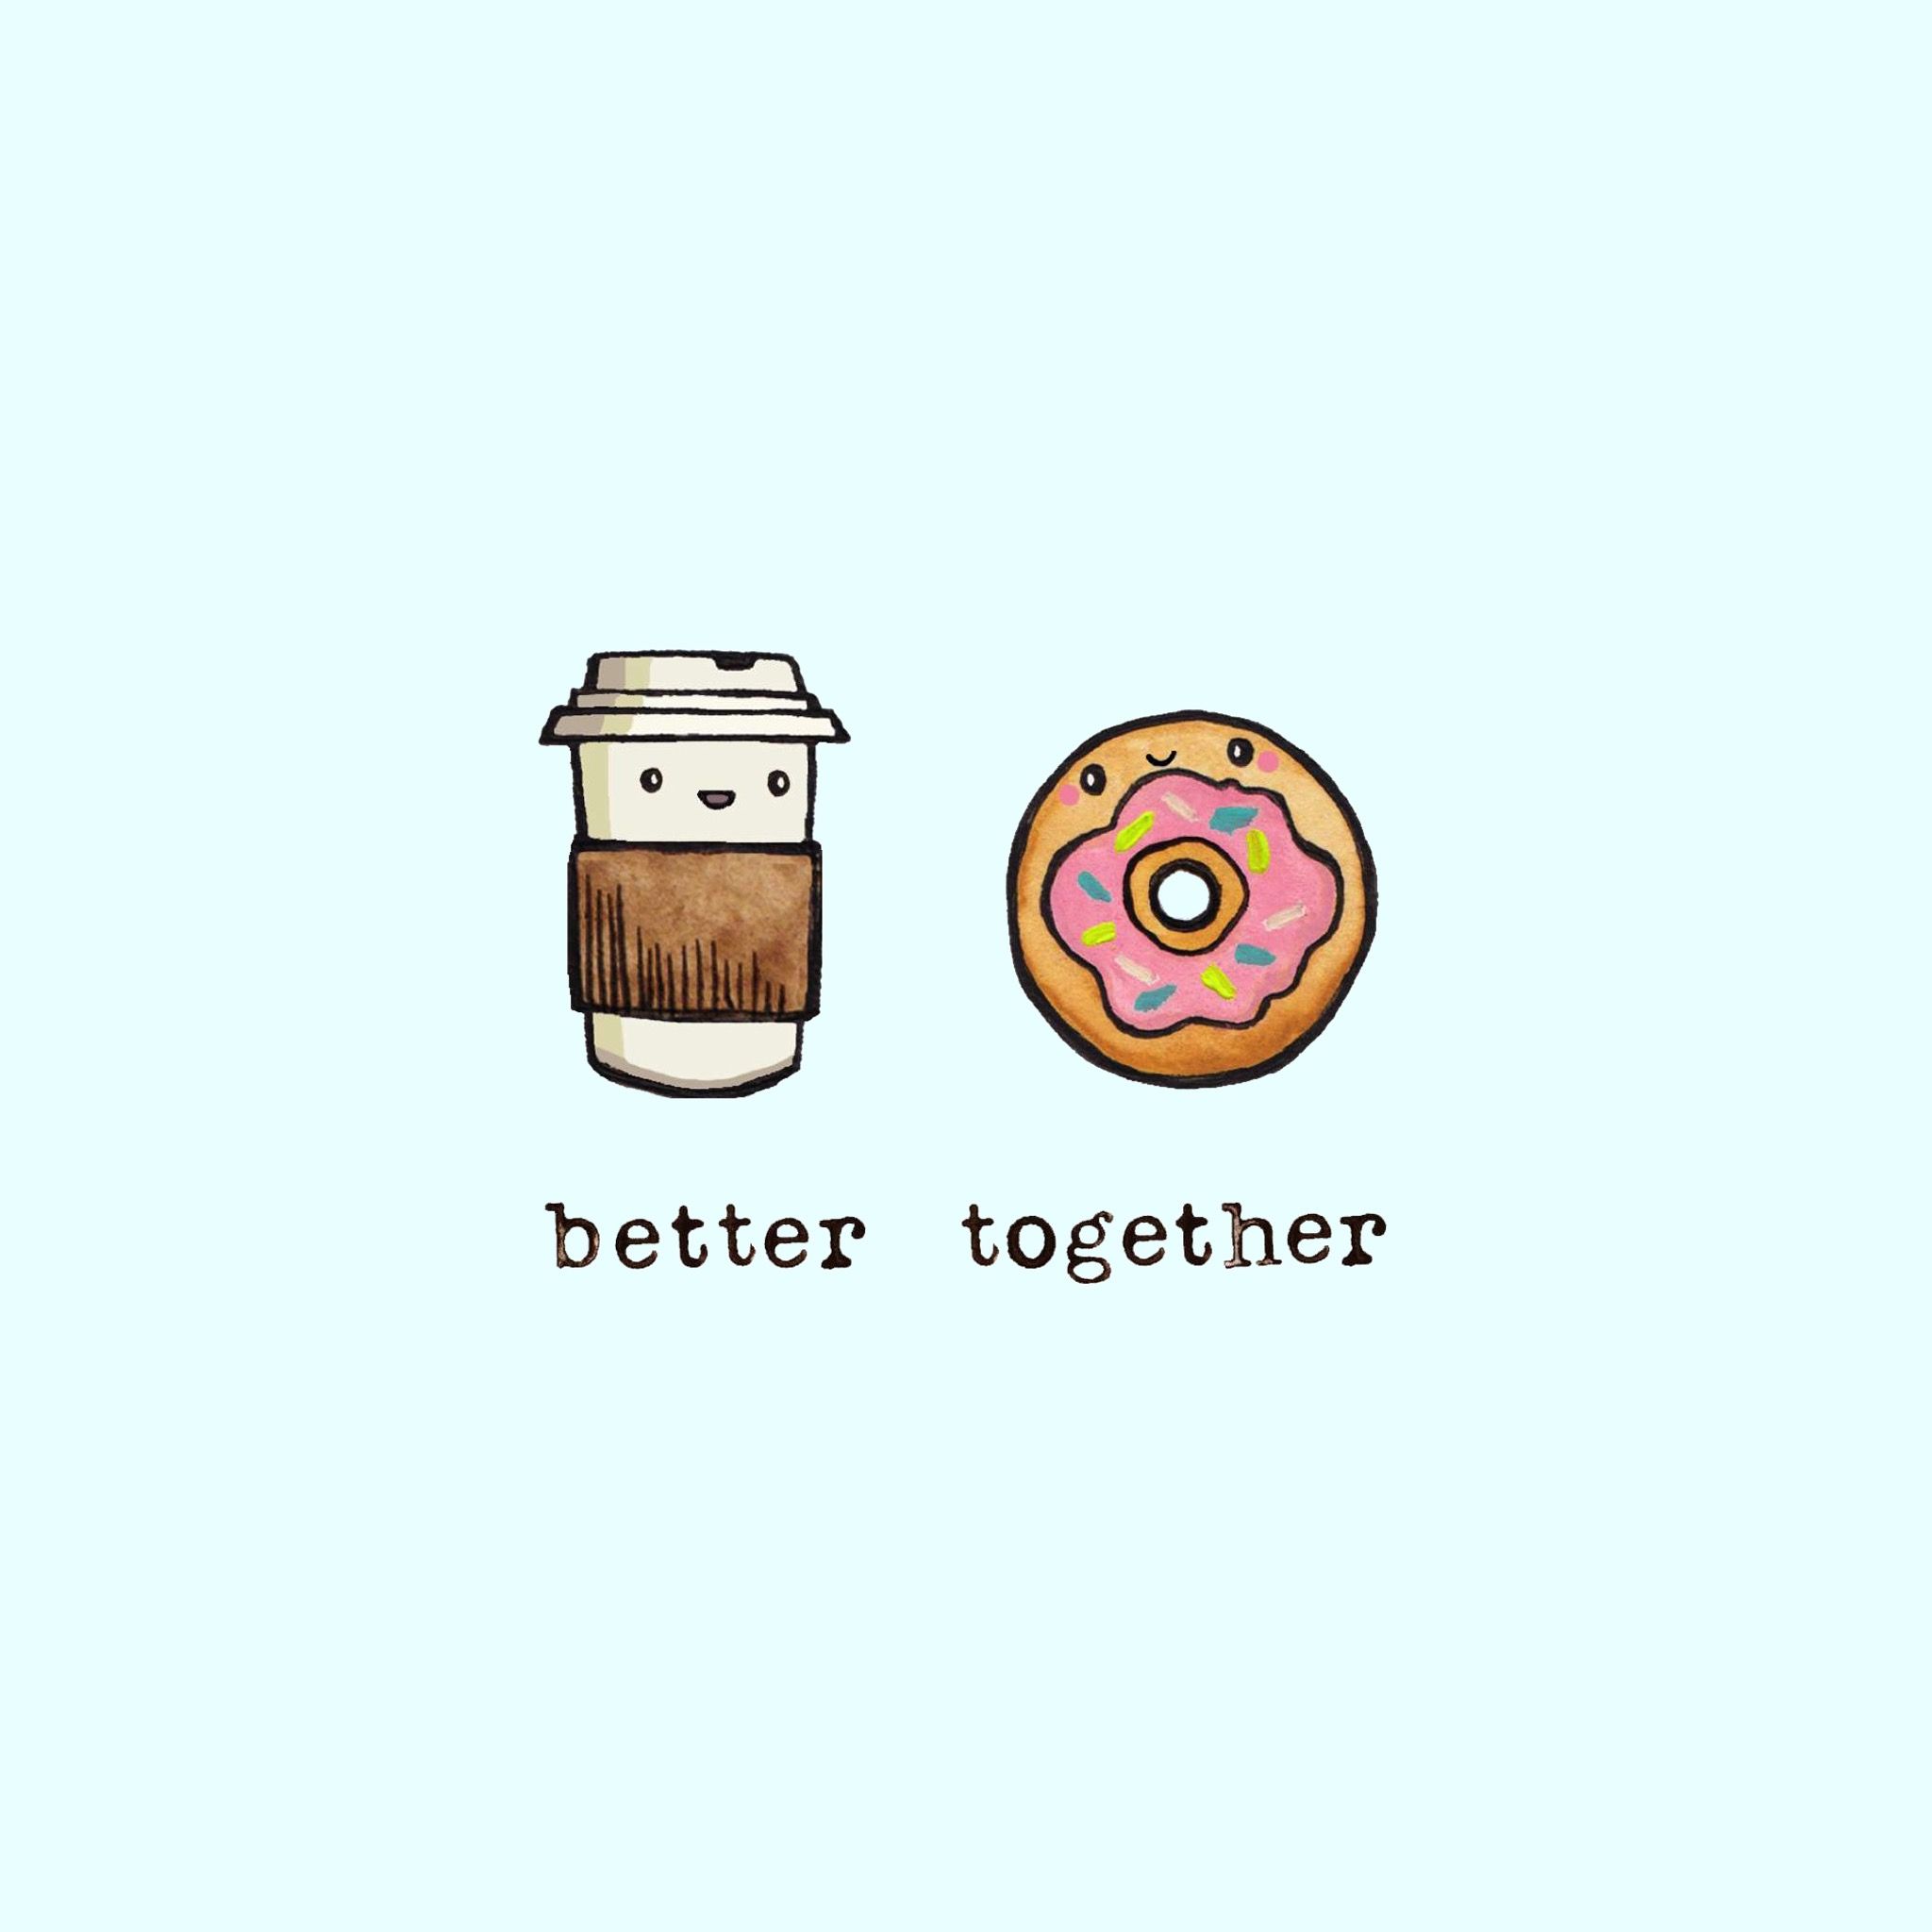 Cute Better Together Drawings - HD Wallpaper 